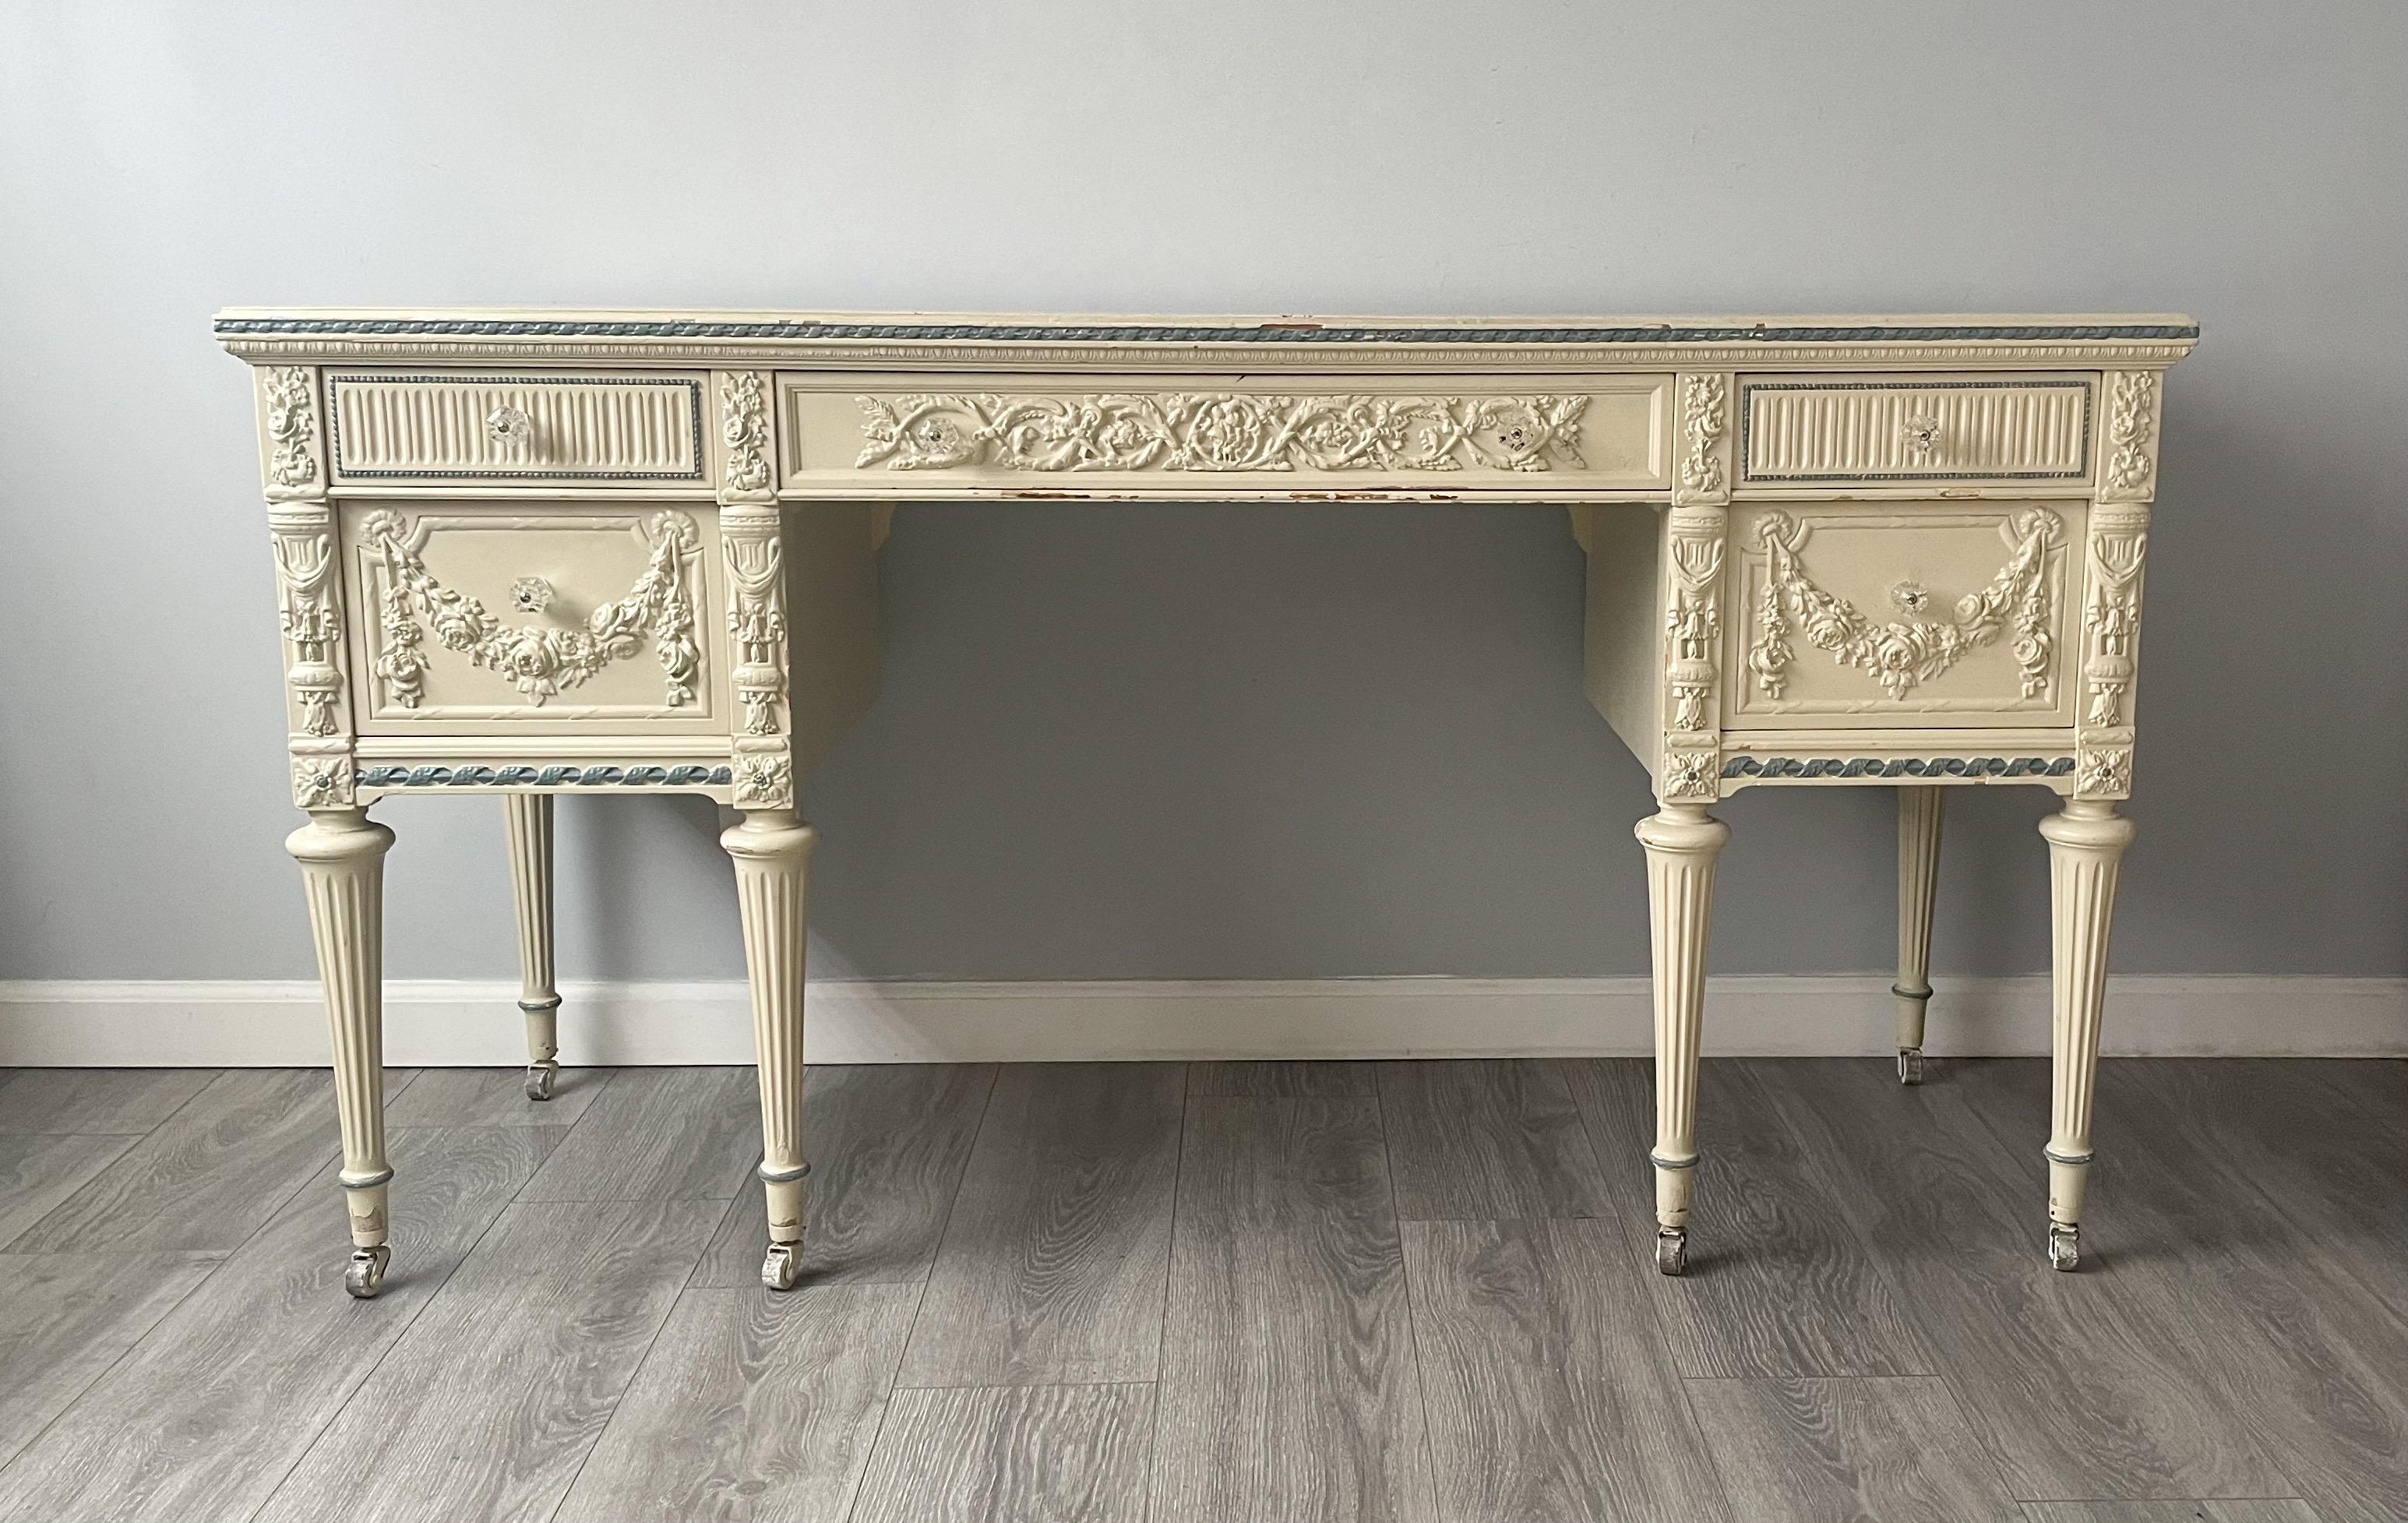 Beautiful, French 1920s painted vanity desk in the Louis XVI style.

The desk features intricately carved classic Louis XVI stylings and an ivory with blue trim paint finish. The glass knobs on the five drawers were a later addition but compliment